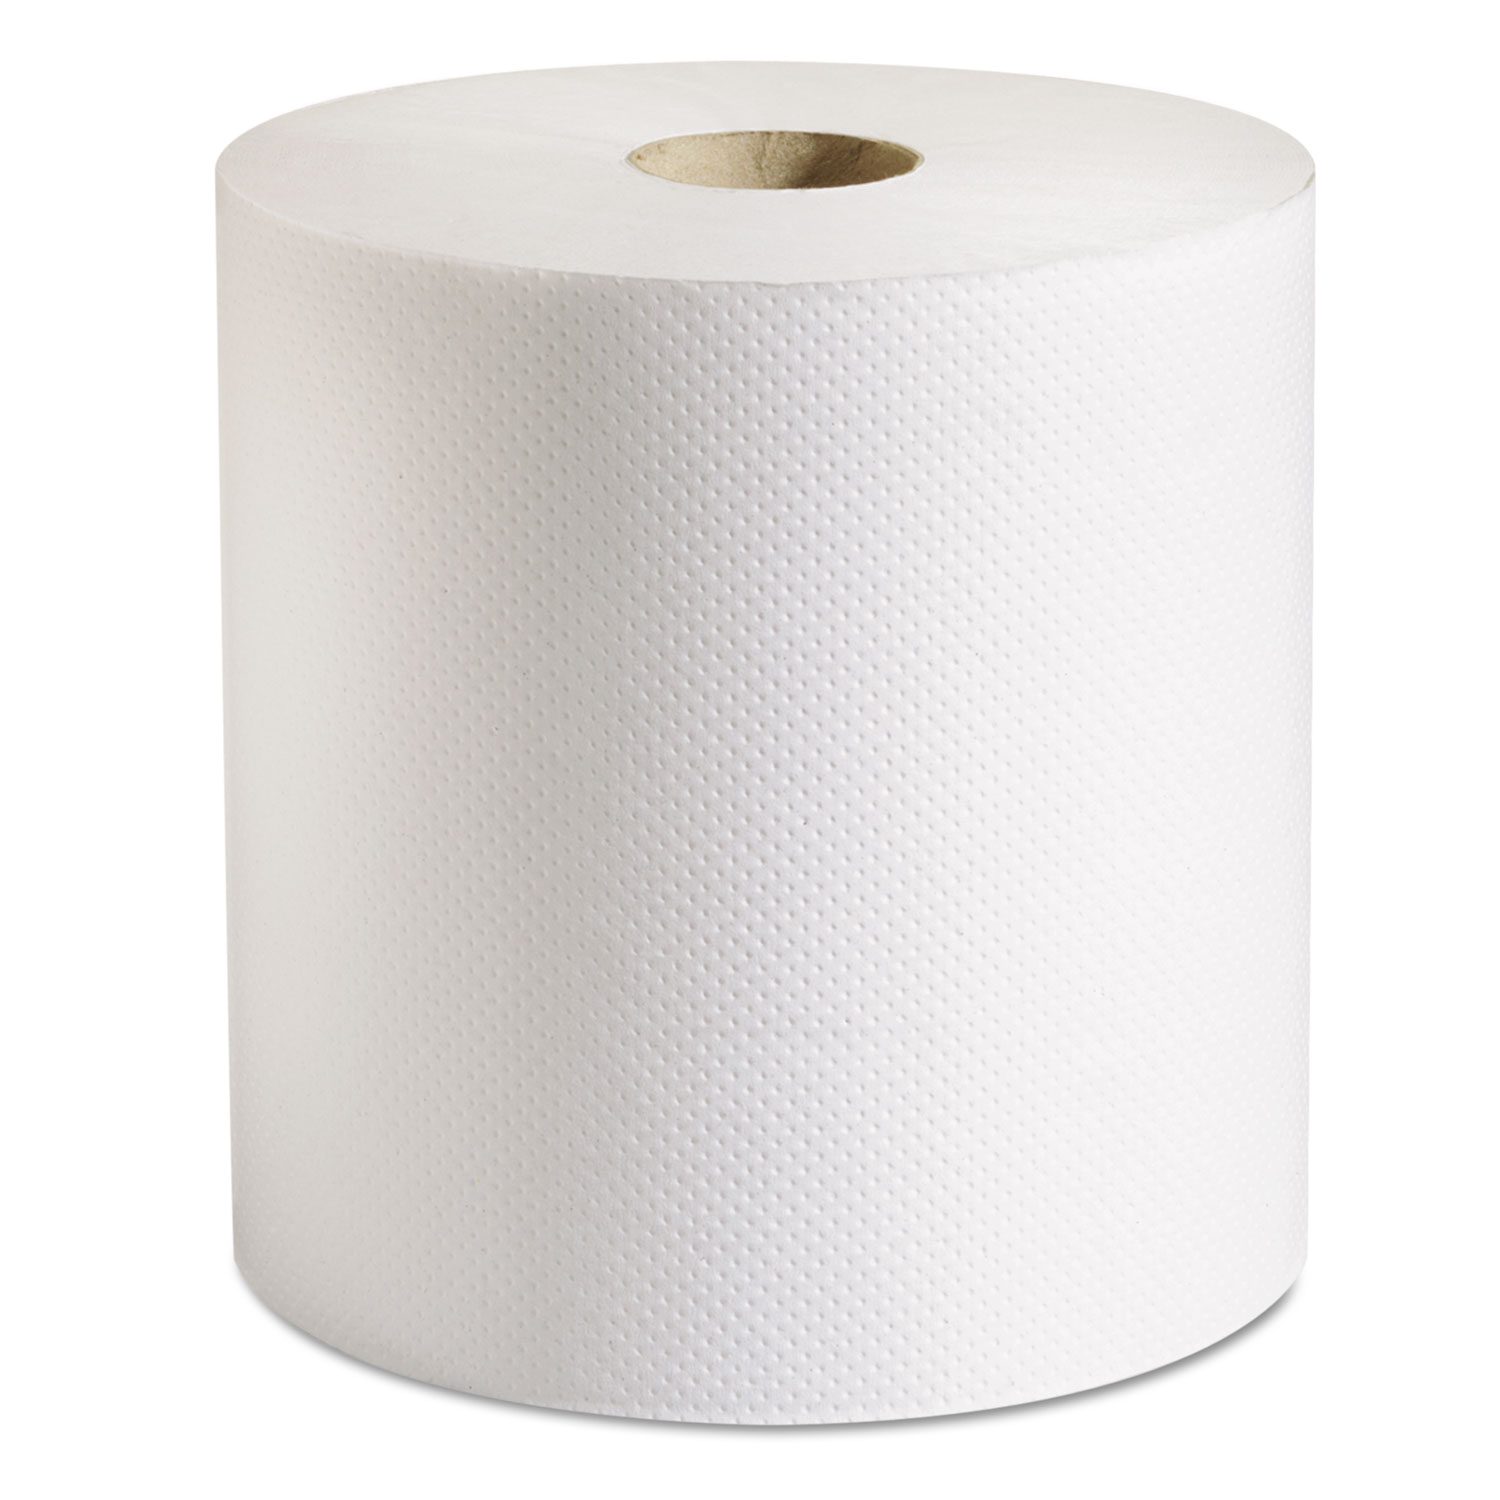  Marcal PRO P-708B 100% Recycled Hardwound Roll Paper Towels, 7 7/8 x 800 ft, White, 6 Rolls/Ct (MRCP708B) 